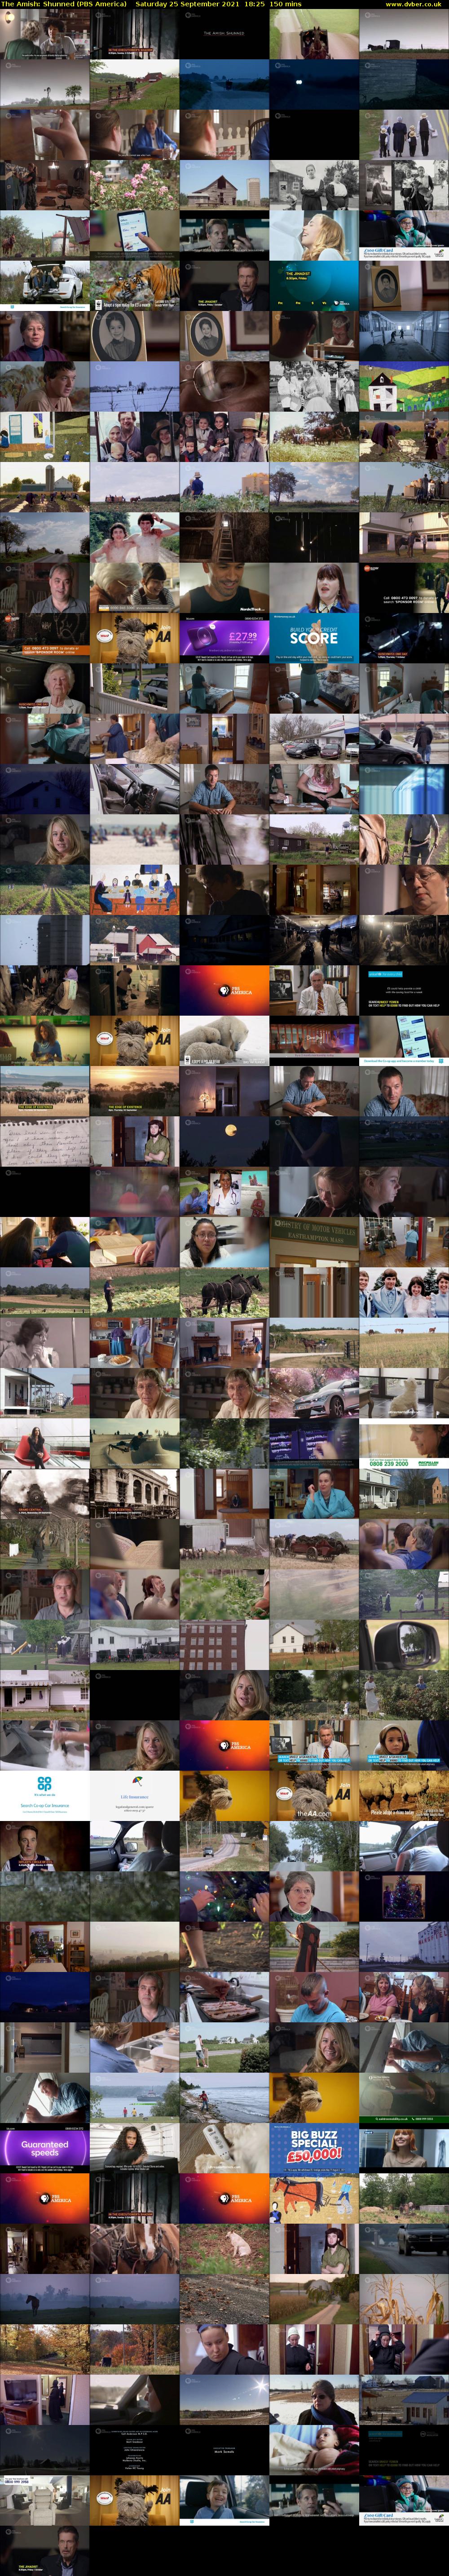 The Amish: Shunned (PBS America) Saturday 25 September 2021 18:25 - 20:55